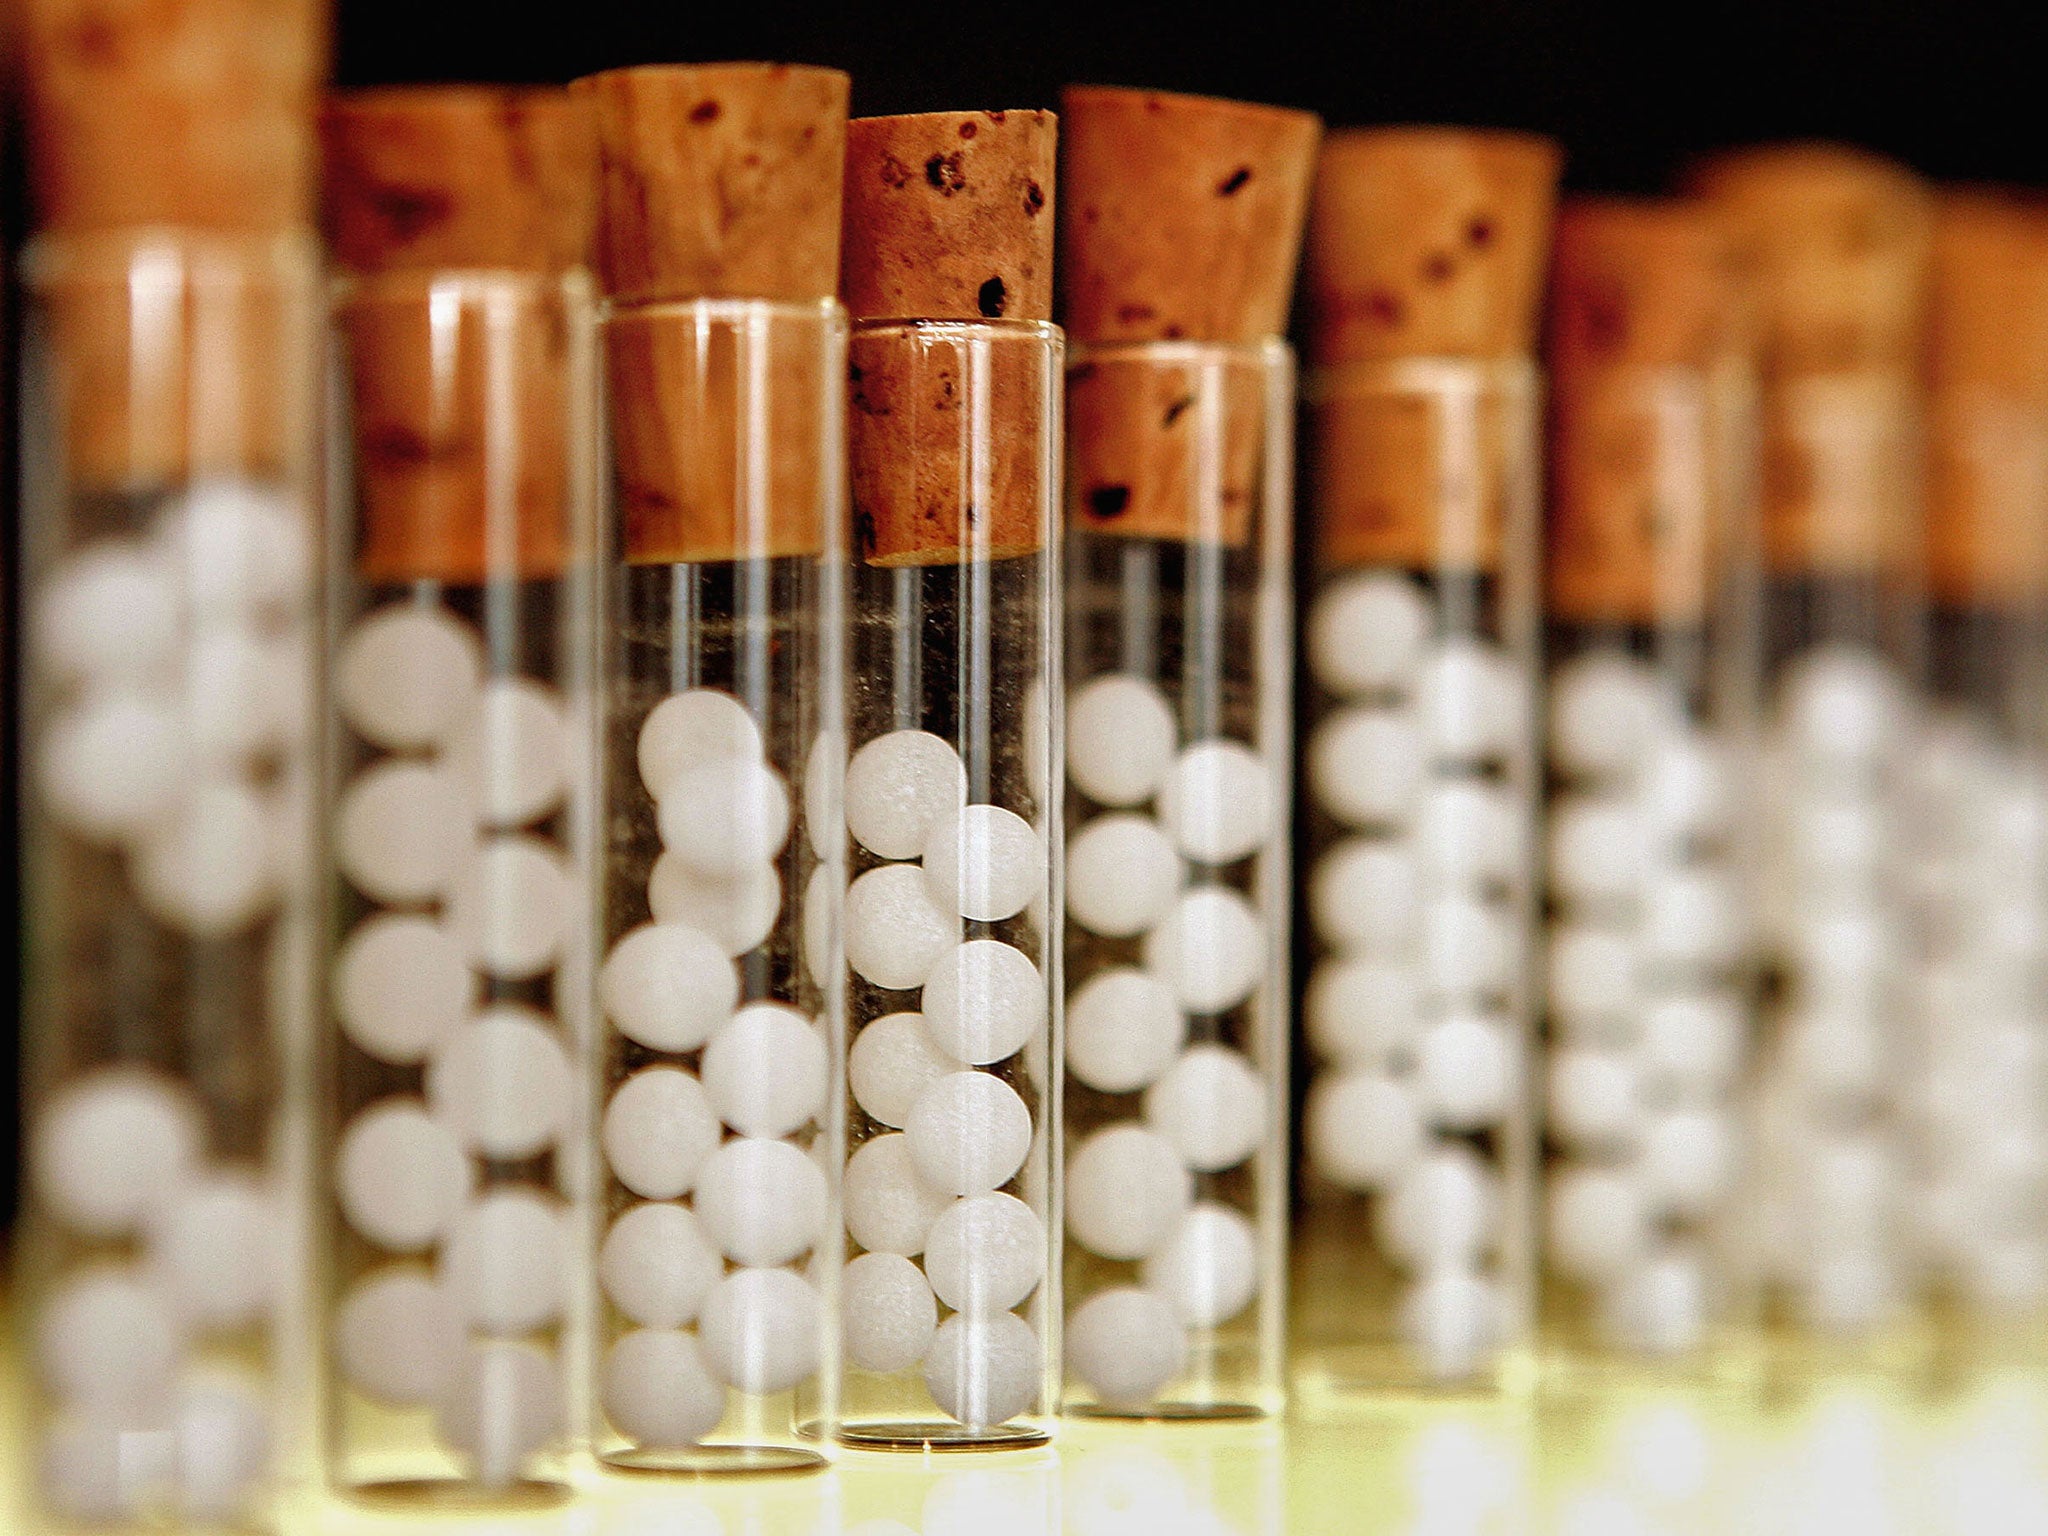 Homeopathy effective for 0 out of 68 illnesses, study finds